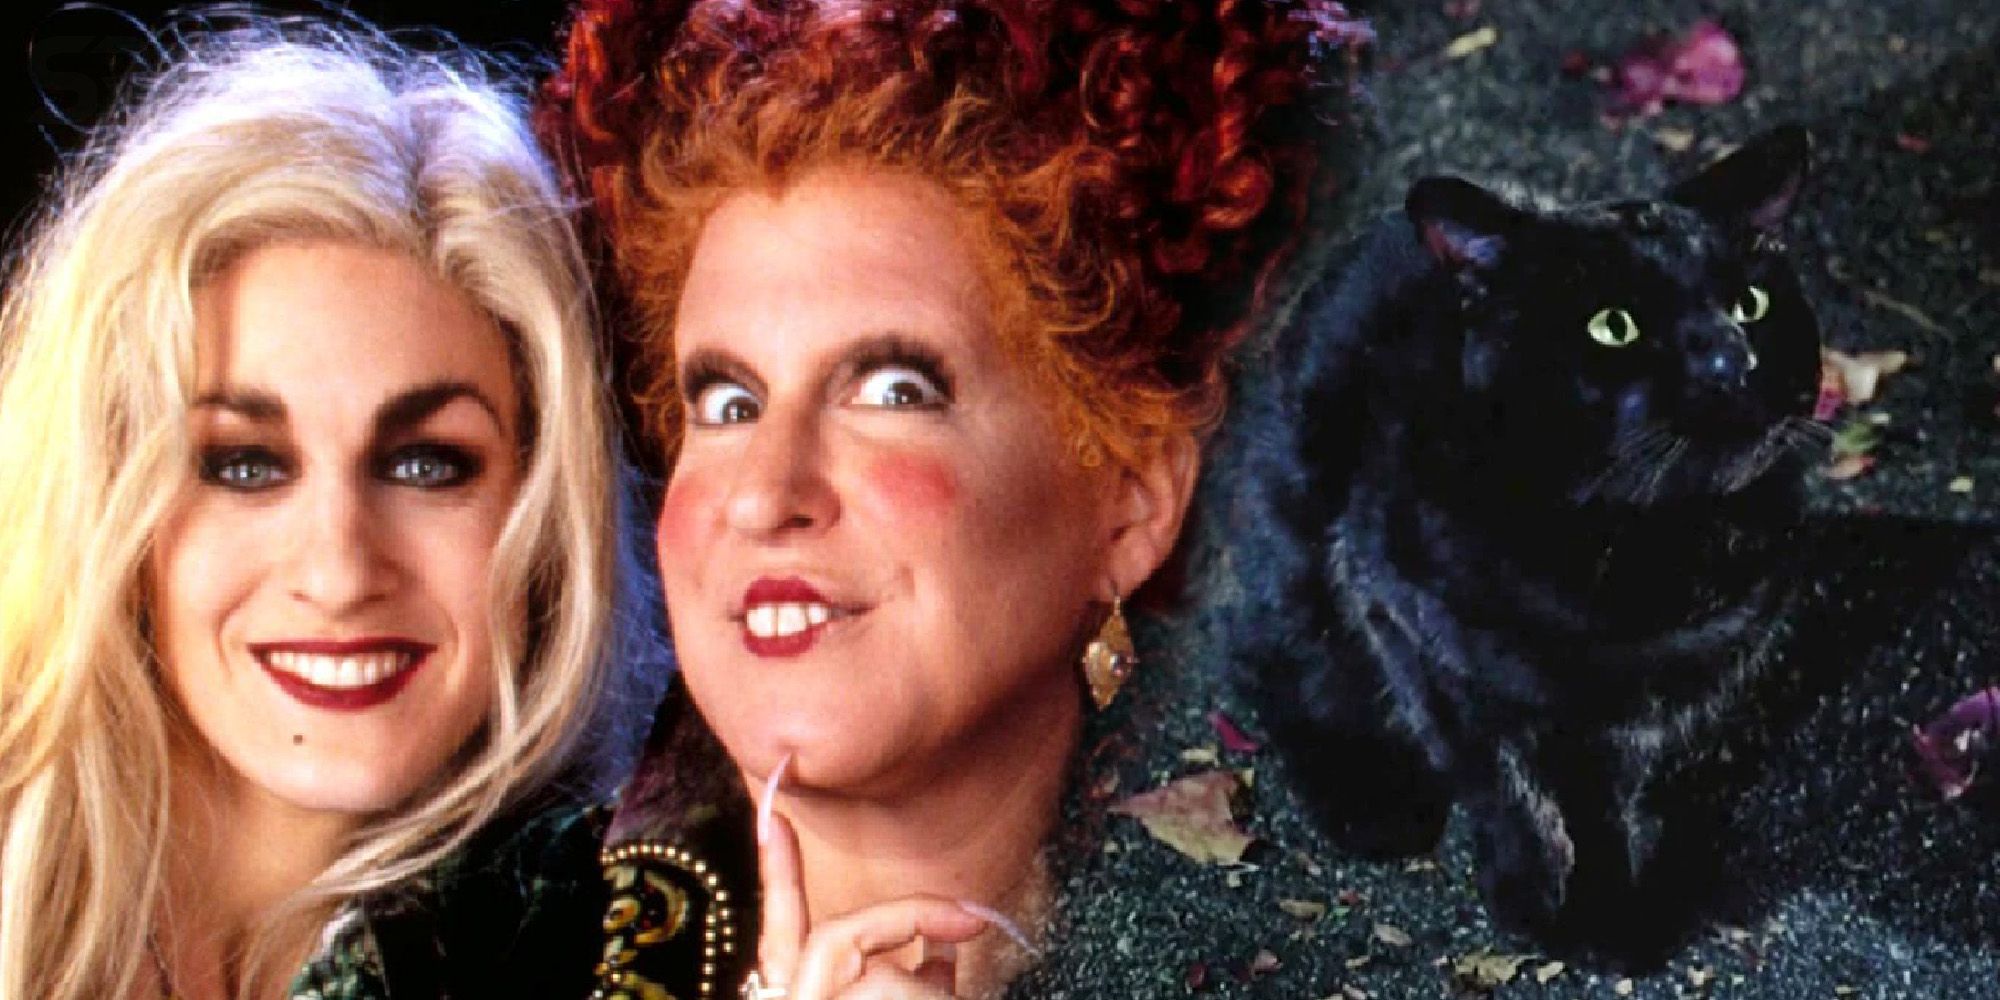 Hocus Pocus 2 Cant Bring Back A Great Character (Without Ruining The Ending)